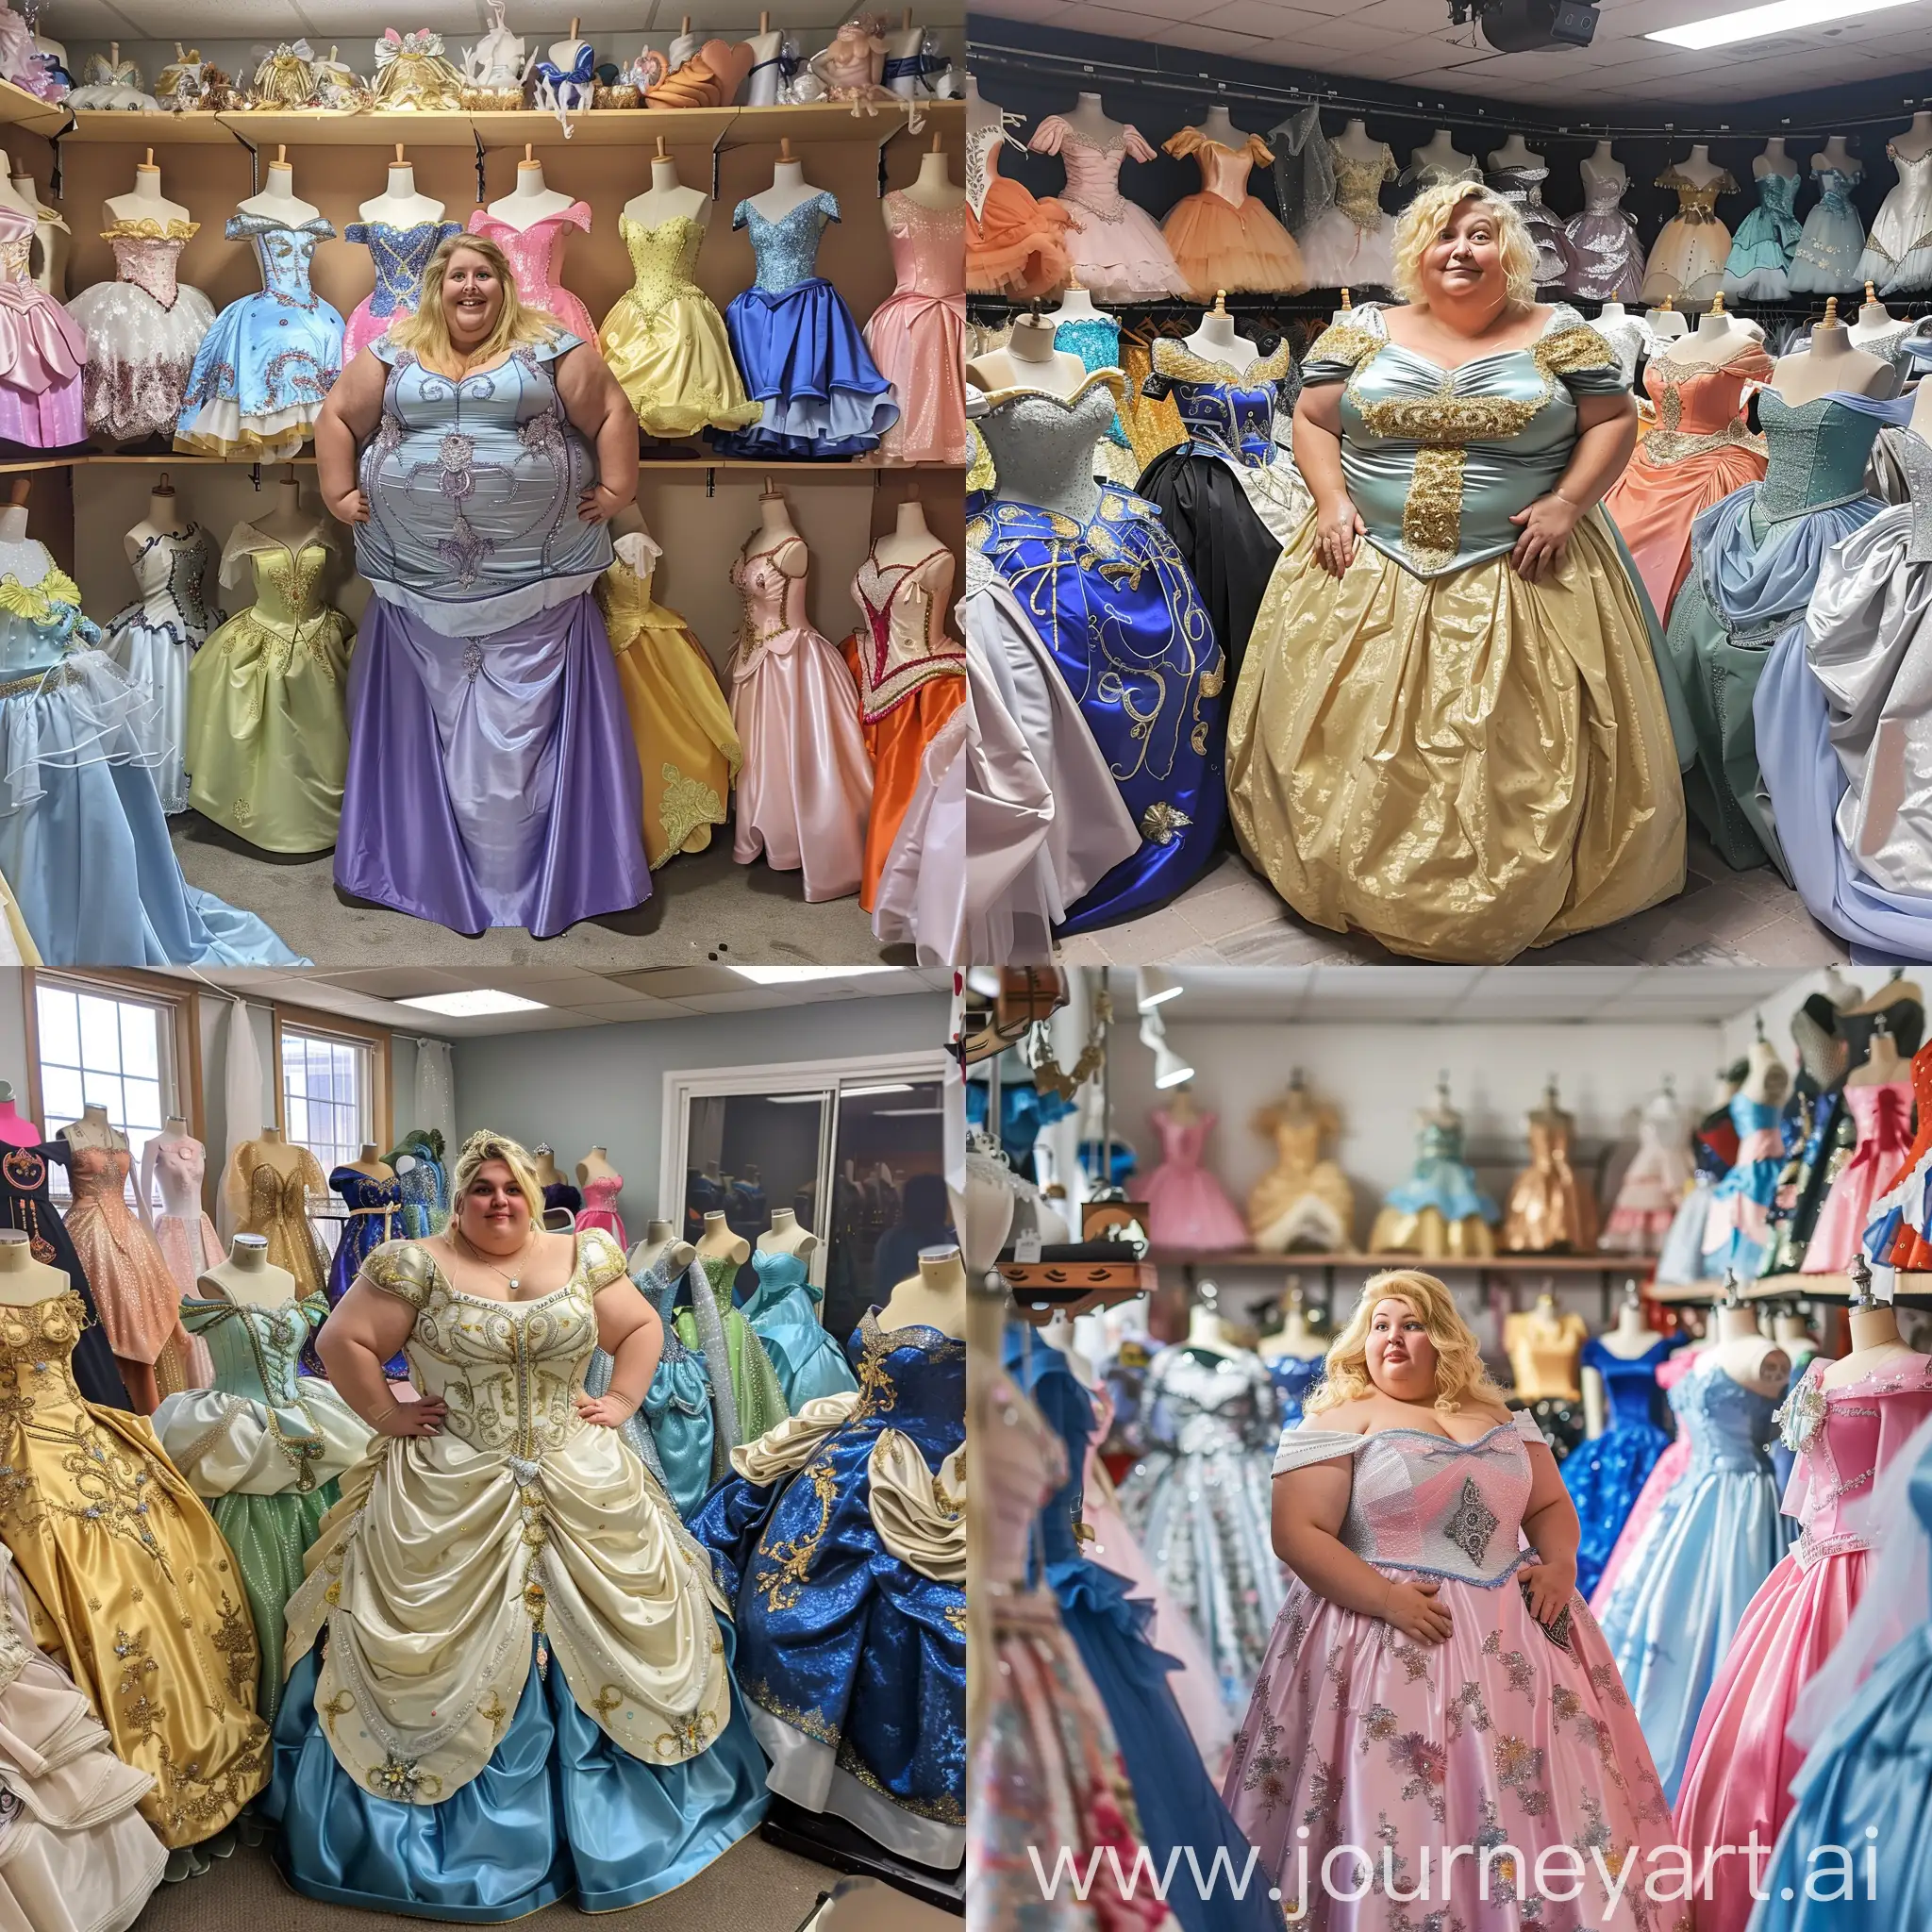 A fat blonde woman in a deluxe fantasy princess dress stands in the costume STUDIO, surrounded by an assortment of princess dresses.
